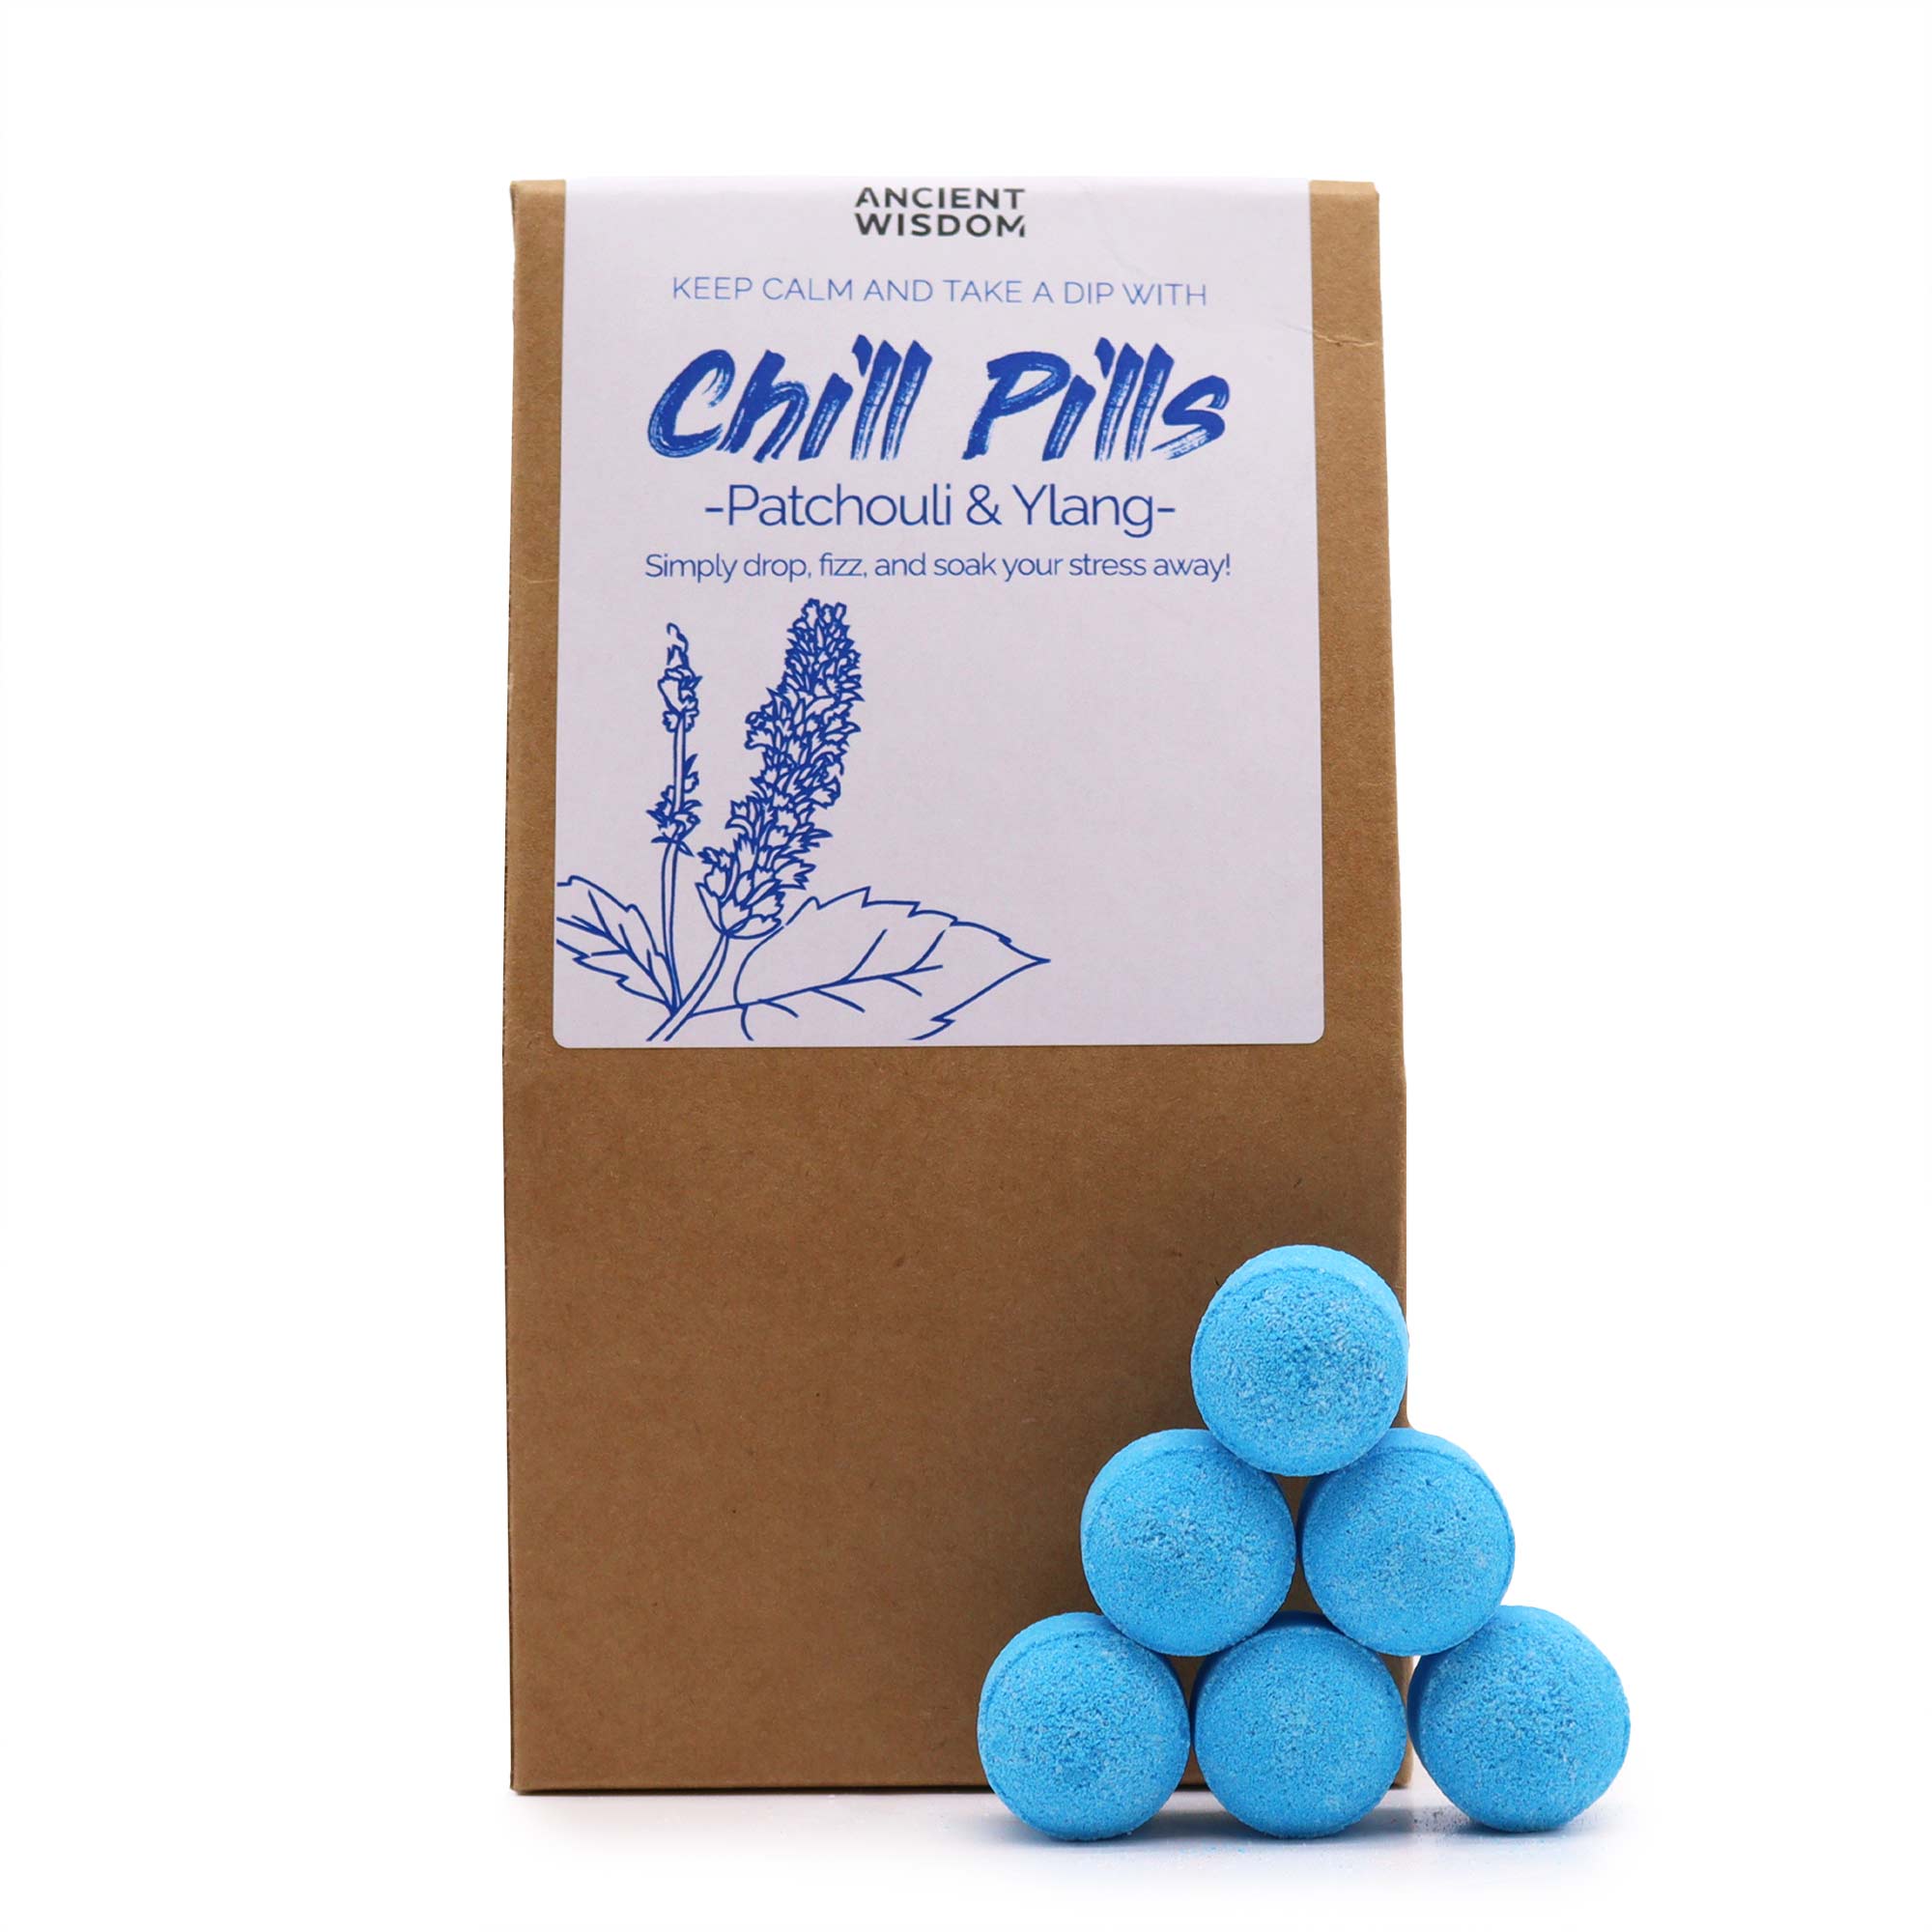 View Chill Pills Gift Pack 350g Ylang Patchouli information